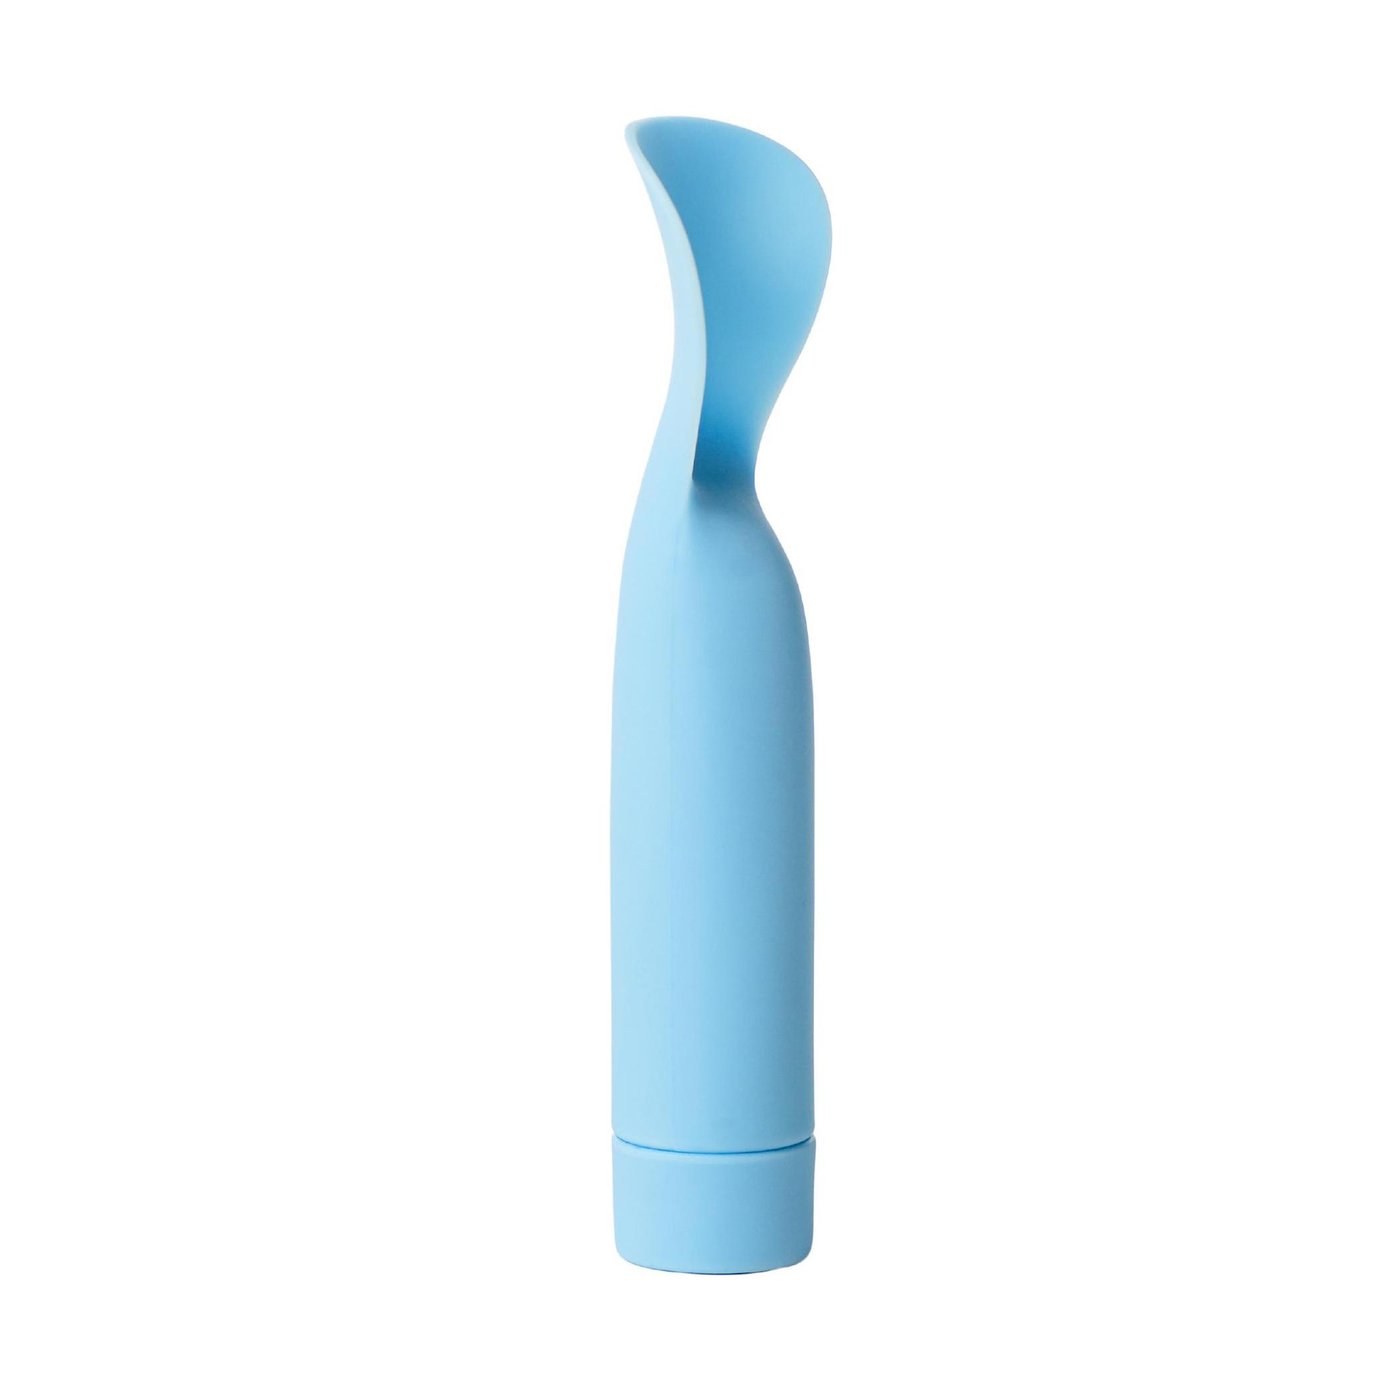 The | Smile goop Vibrator Makers Lover French